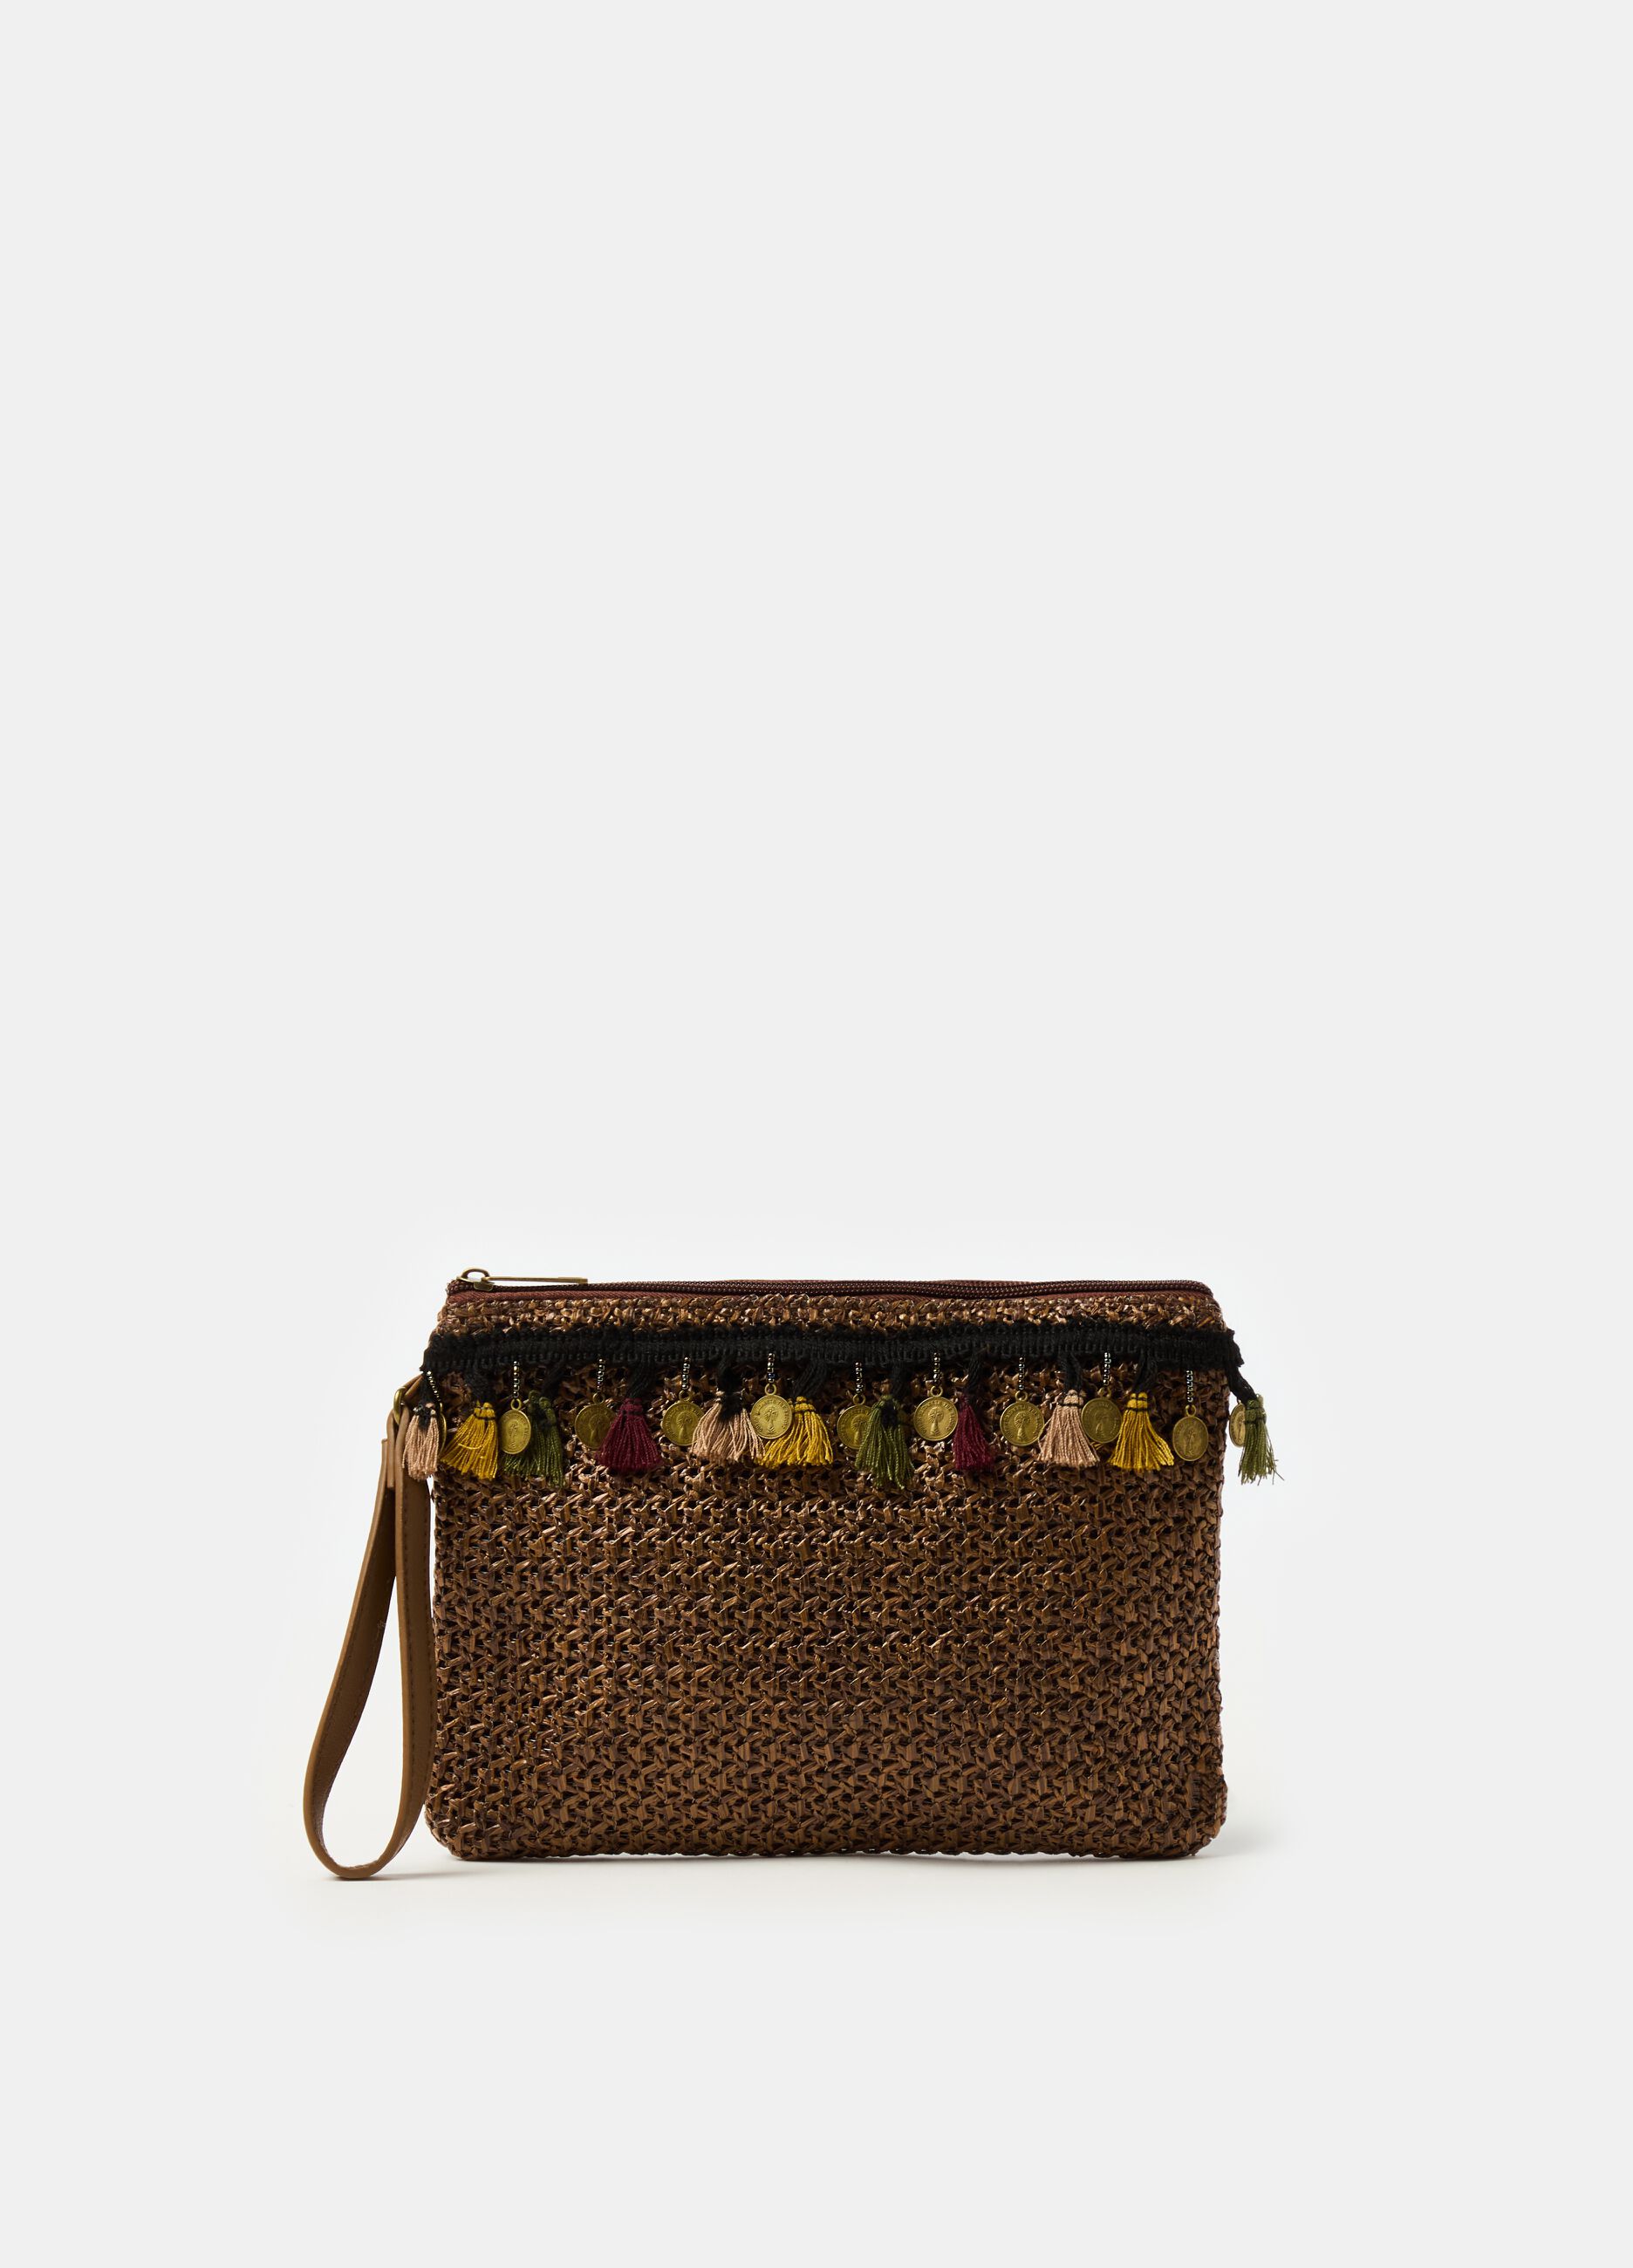 Clutch bag with crochet application and tassels